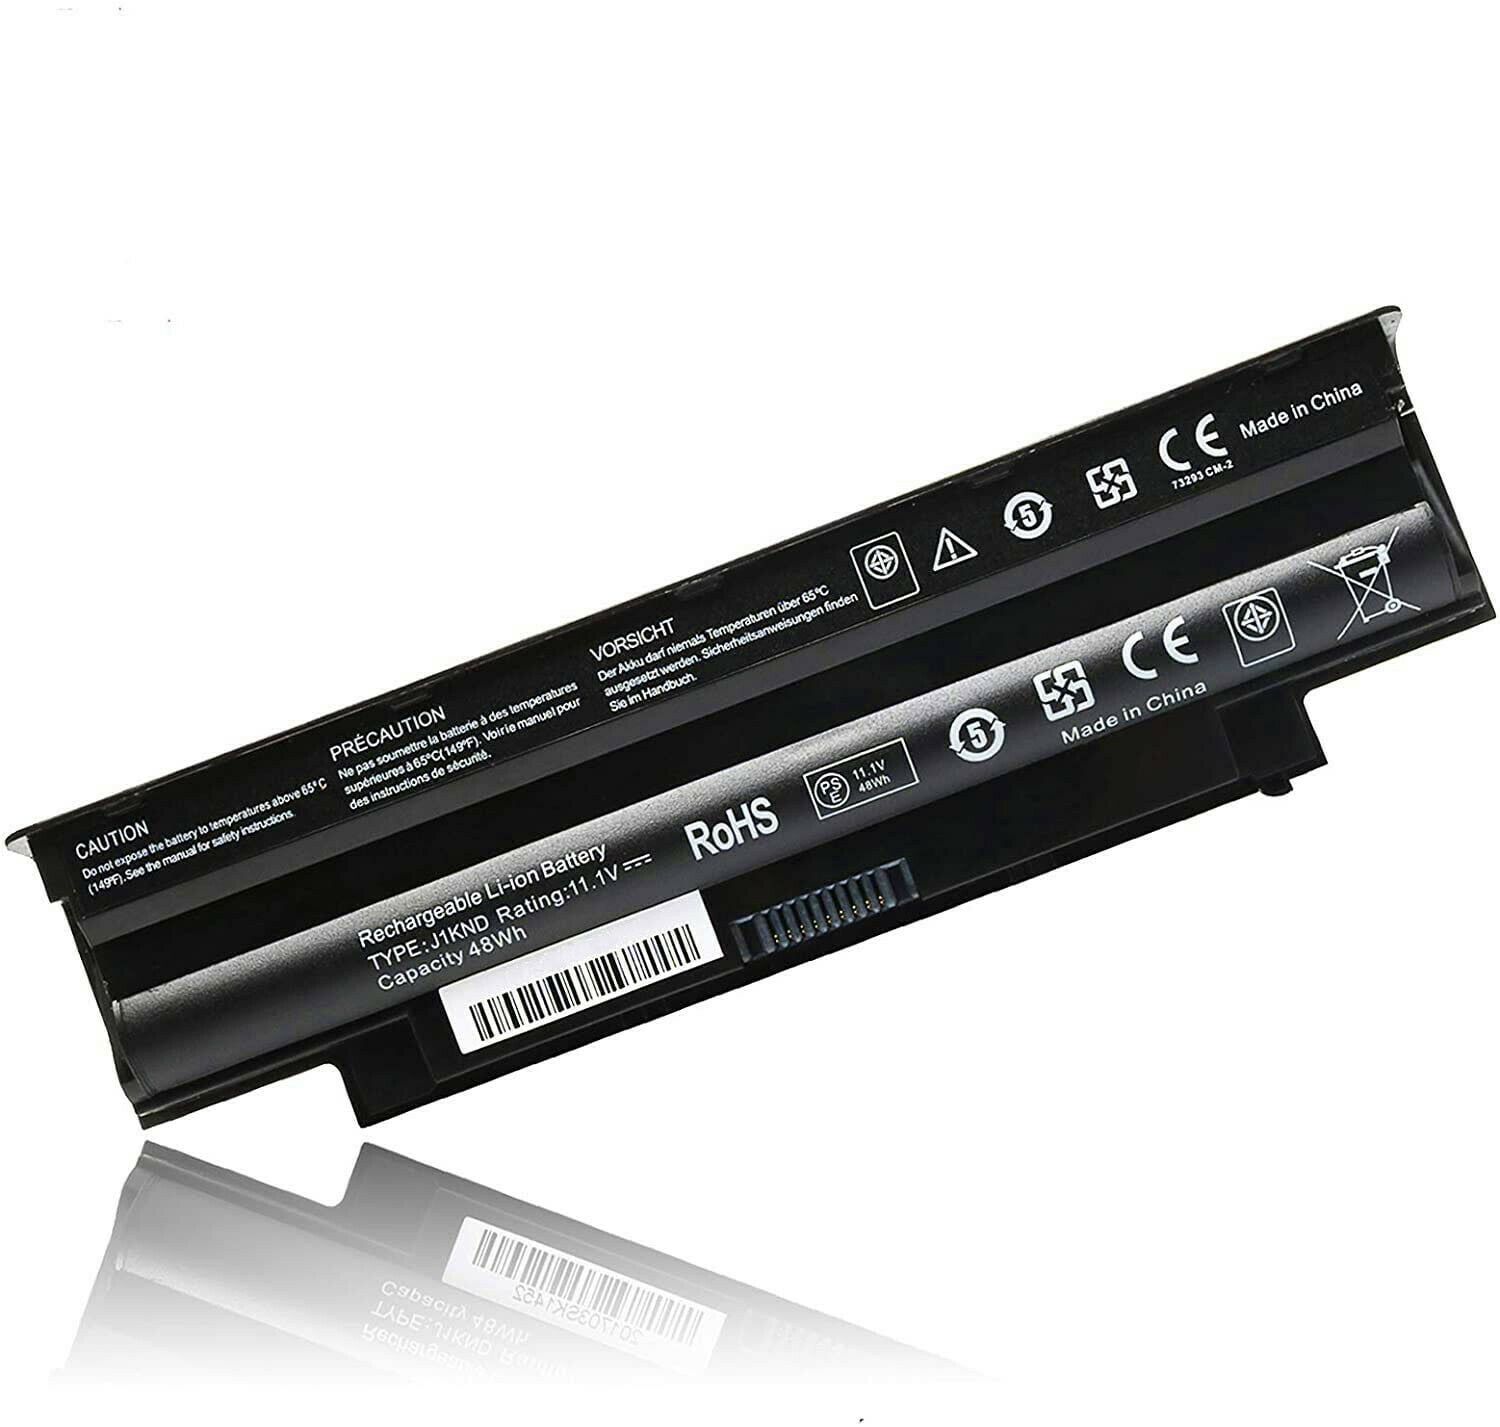 Ithaca temporary Thaw, thaw, frost thaw Replacement For Dell J1KND Laptop Battery (4400mAh, 11.1v, Lithium Ion) -  Walmart.com